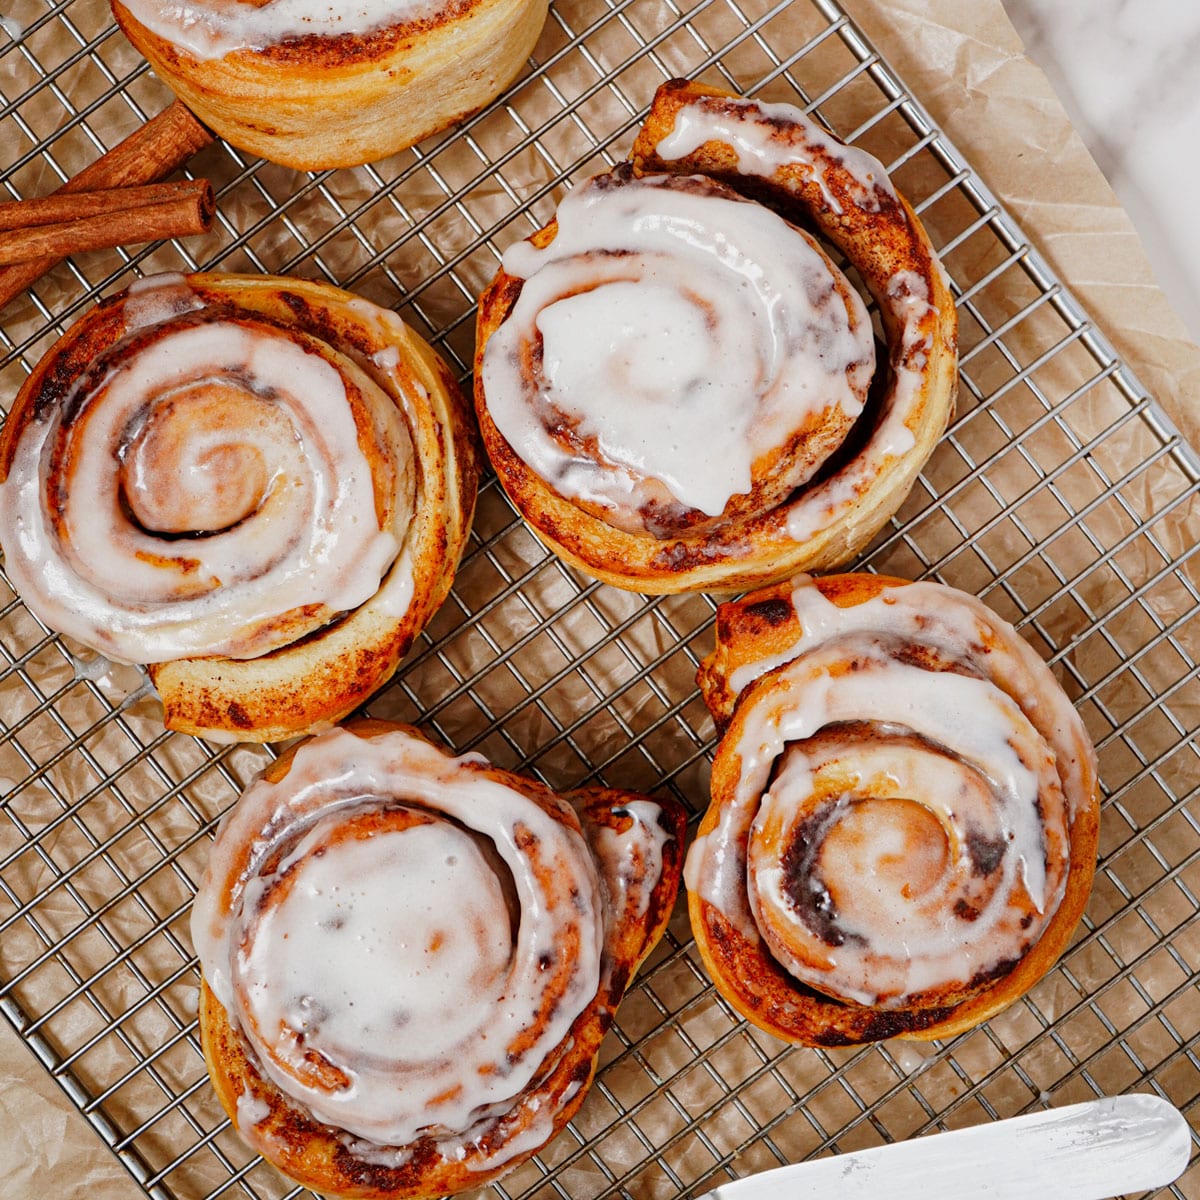 Air fried Pillsbury Grands cinnamon rolls with original icing on a cooling rack.